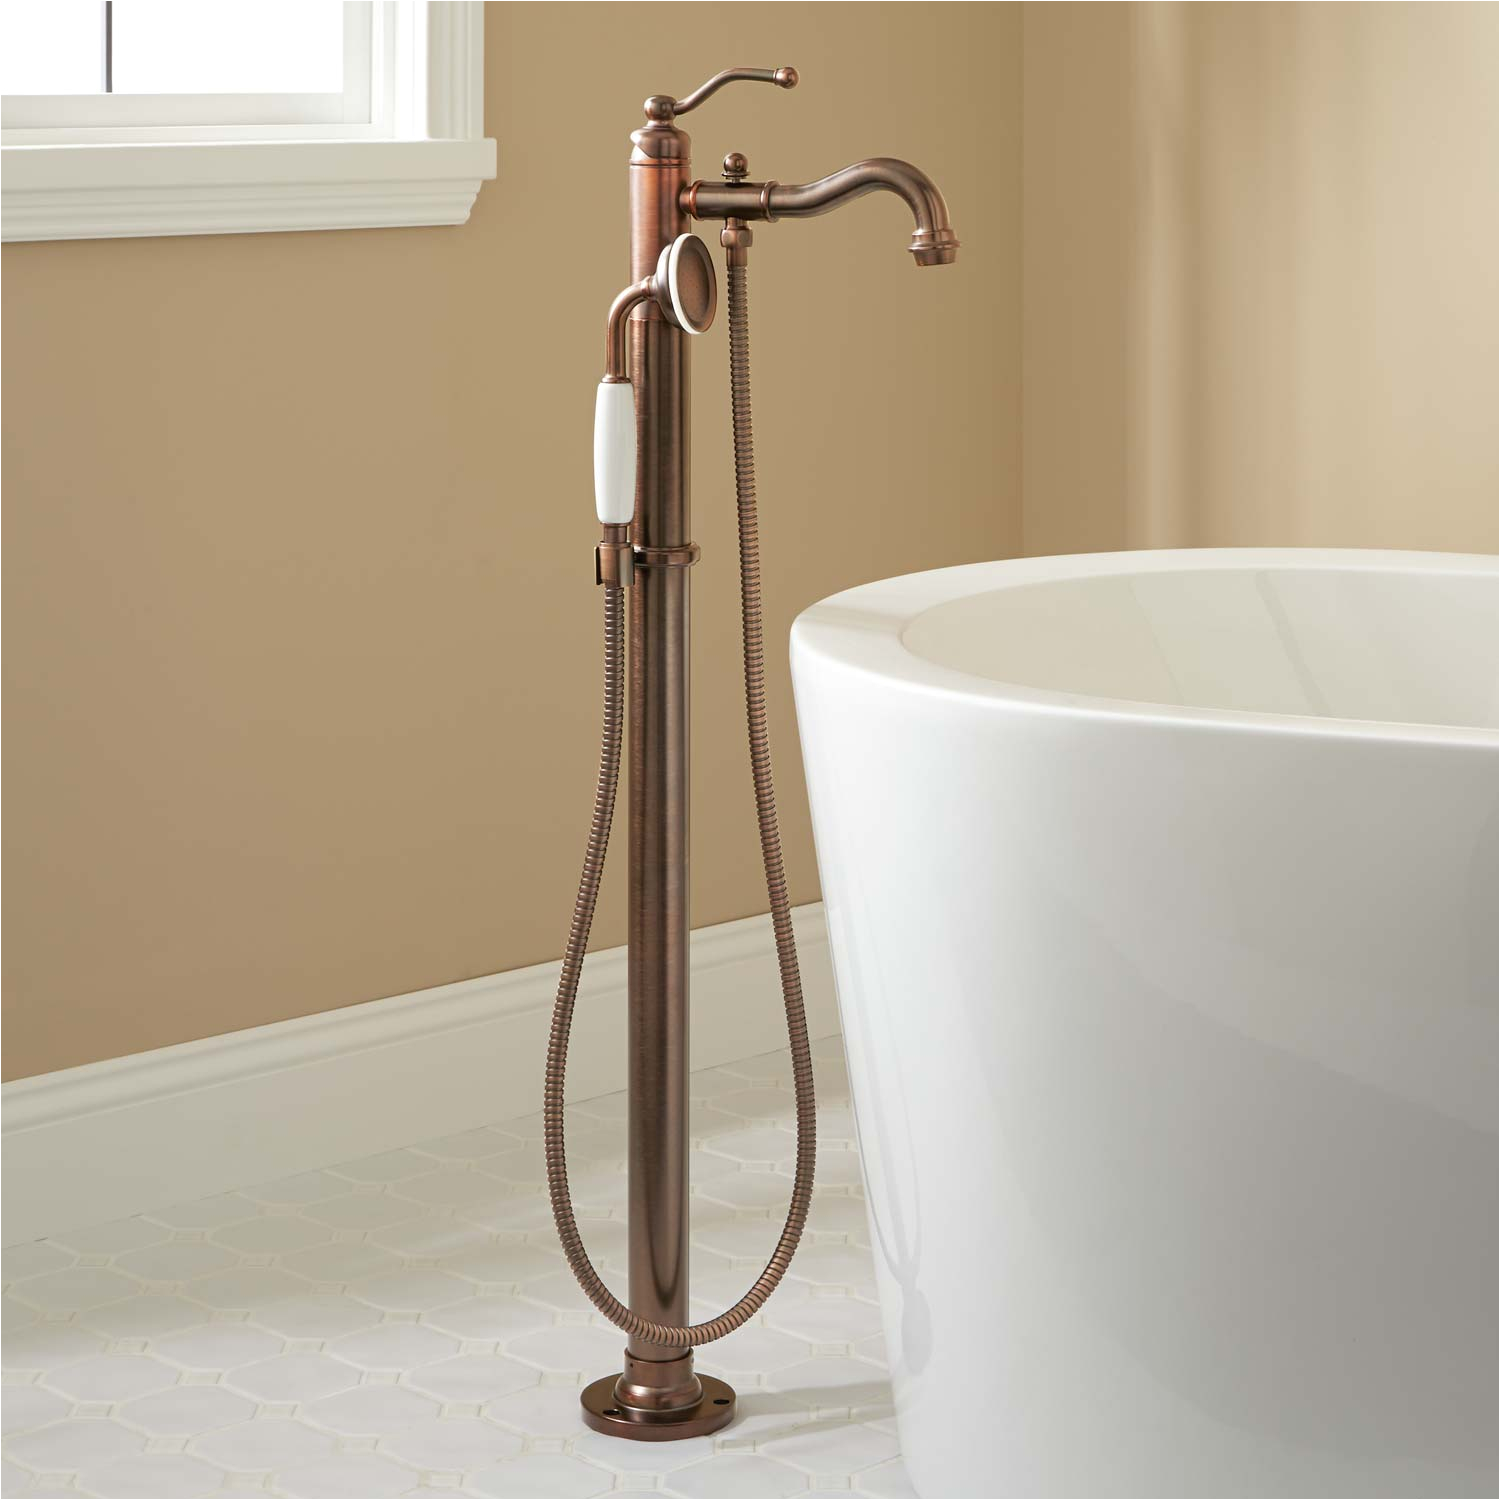 lc ing guide tub faucet